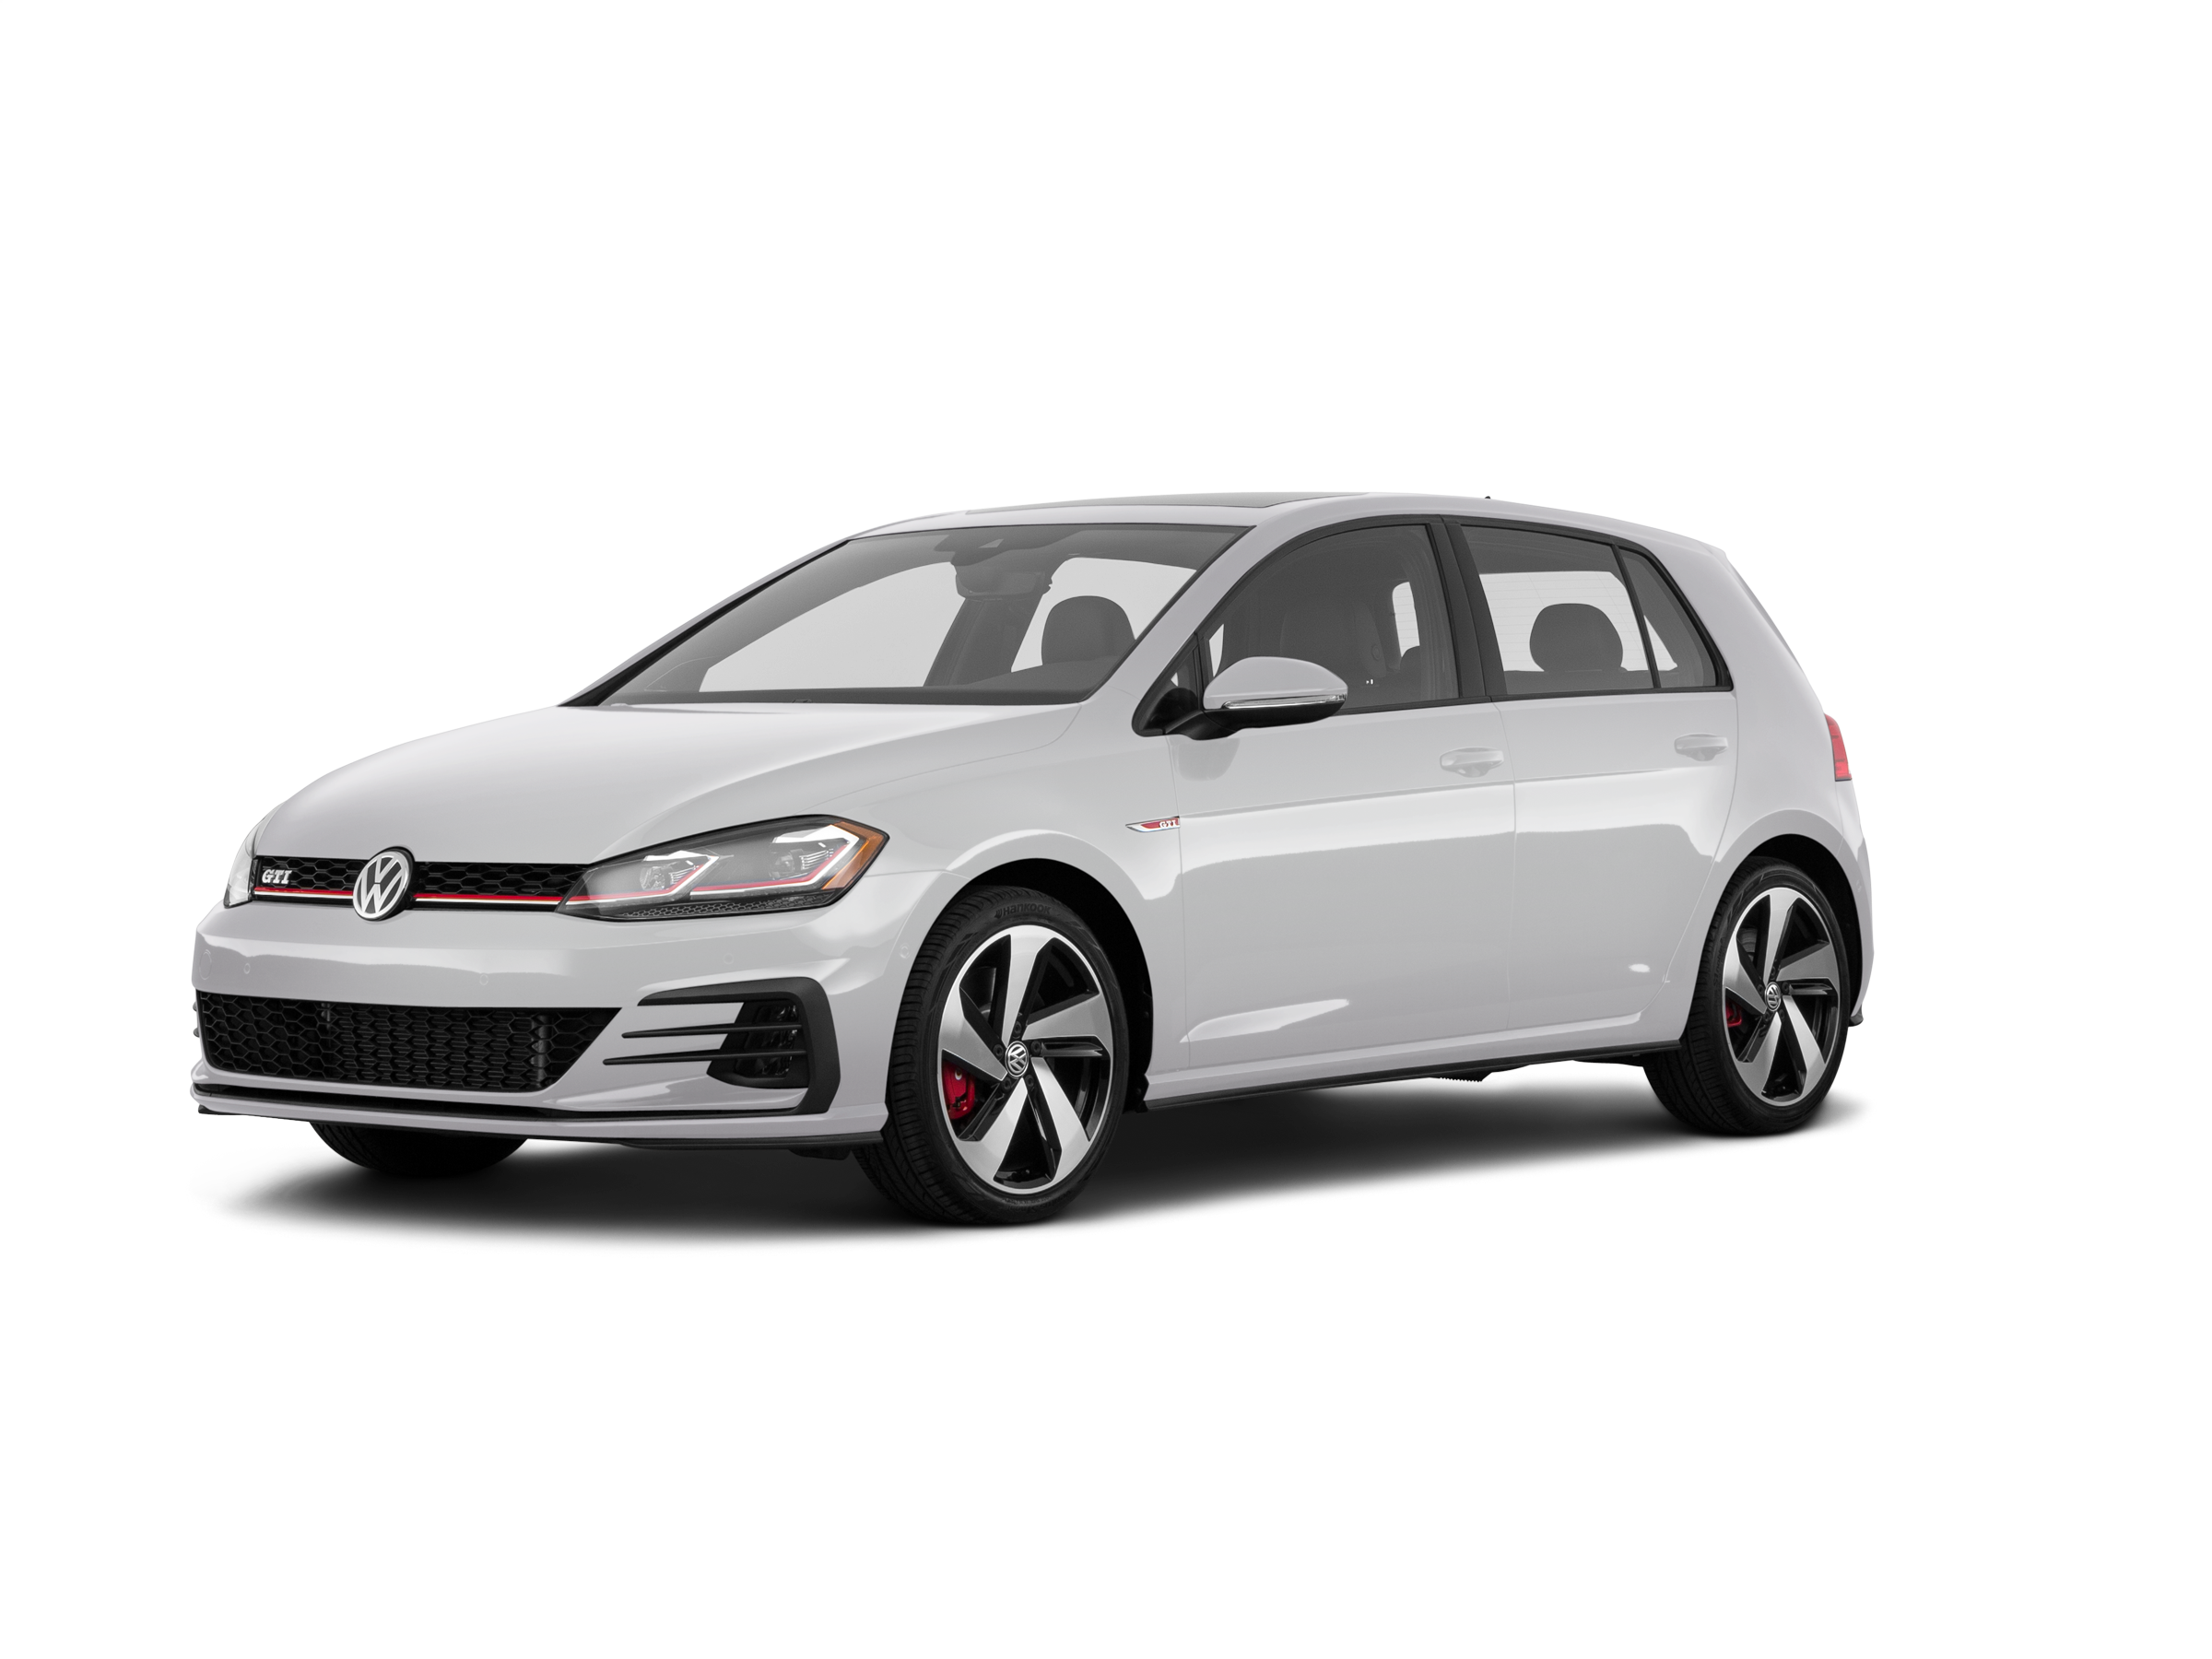 Used Volkswagen Golf 2017-2019 review